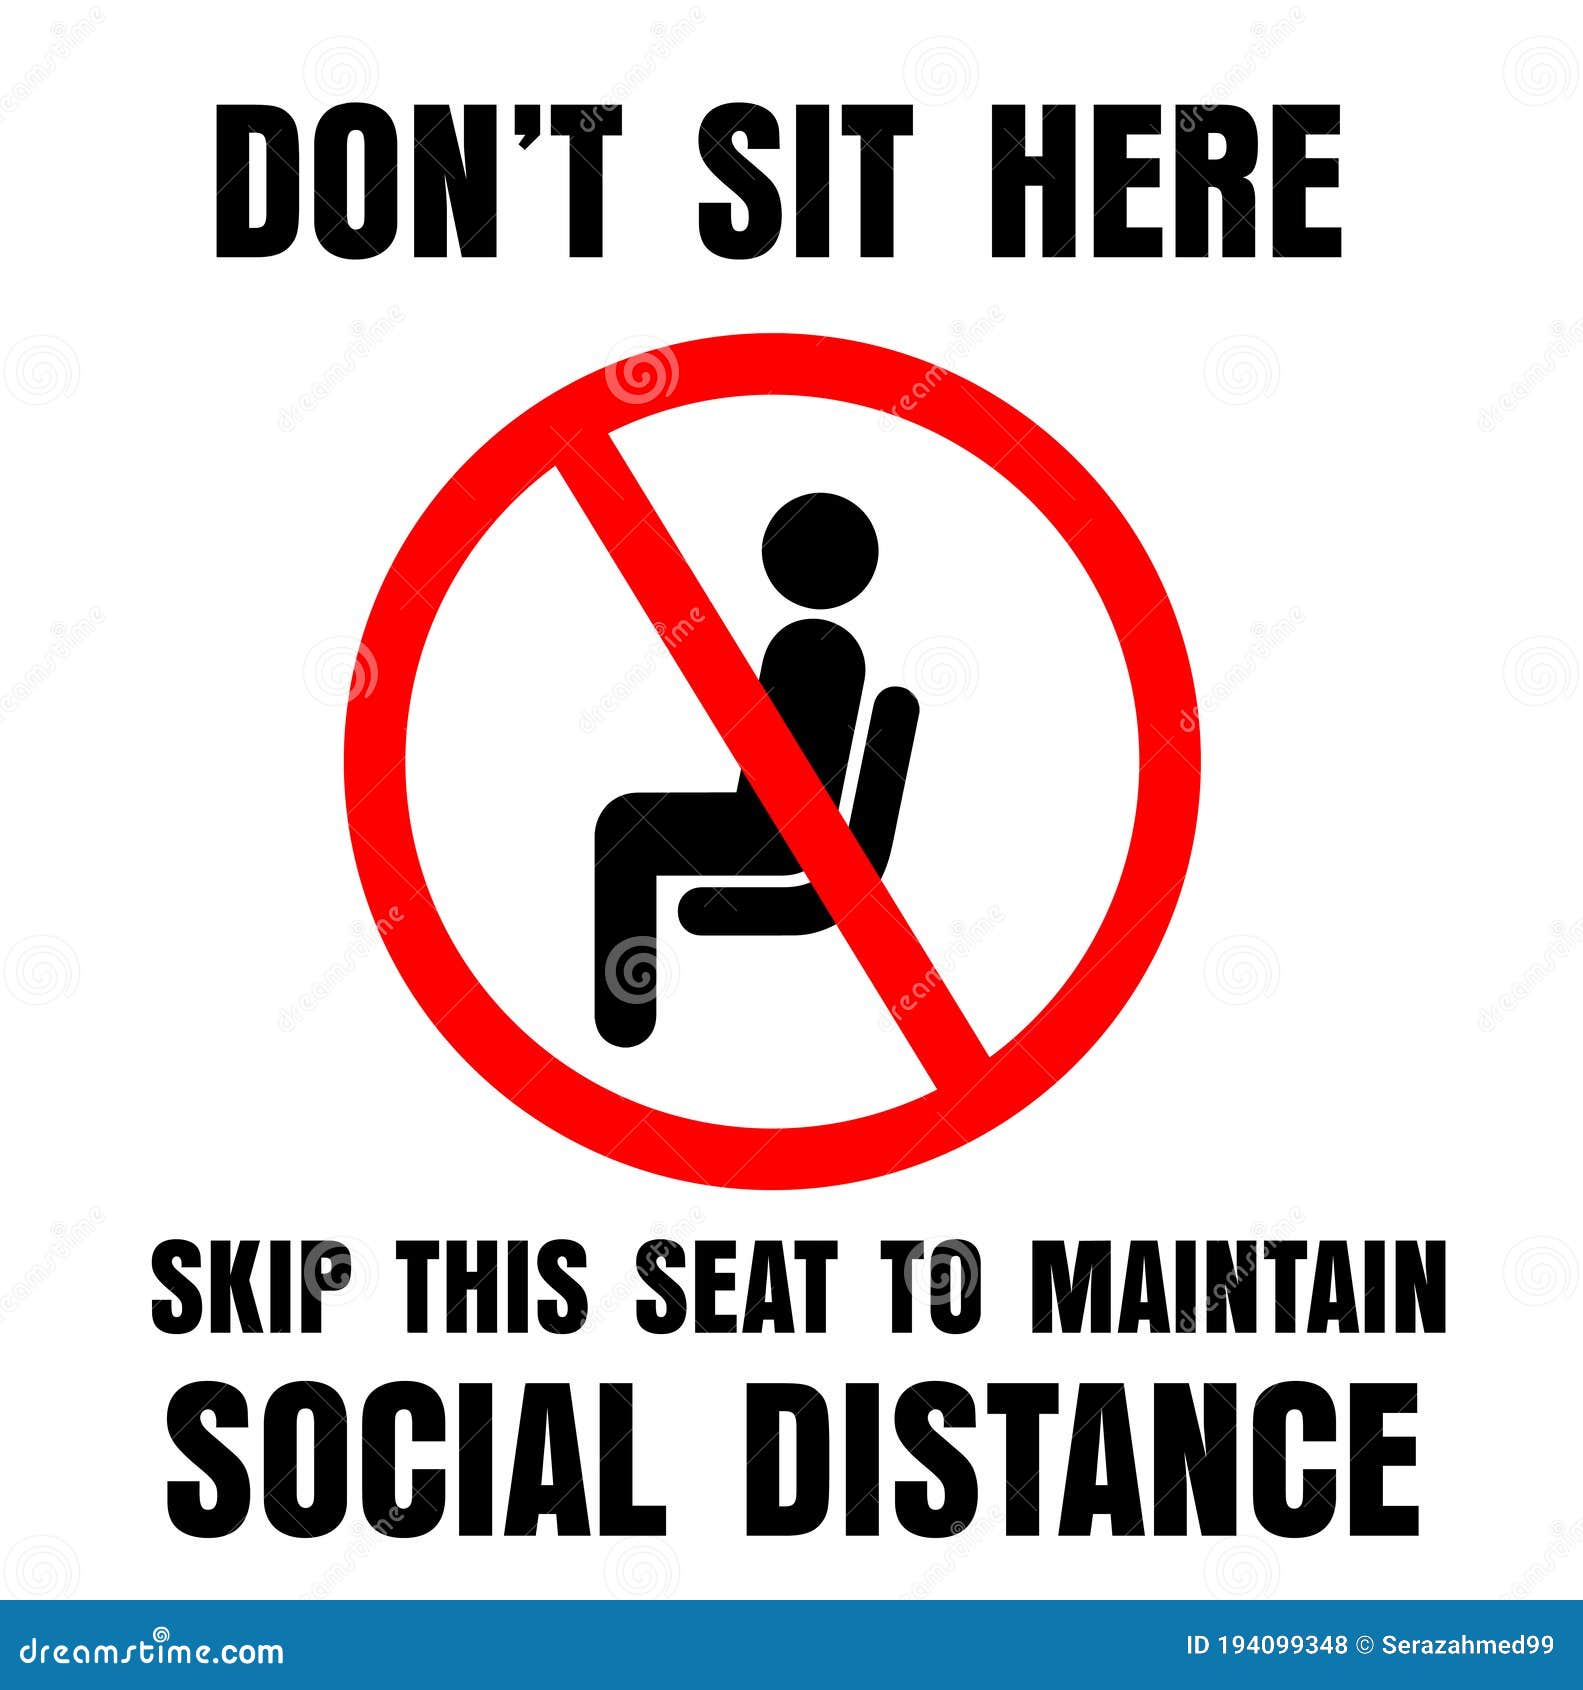 do not sit here sign for public places to encourage social distancing